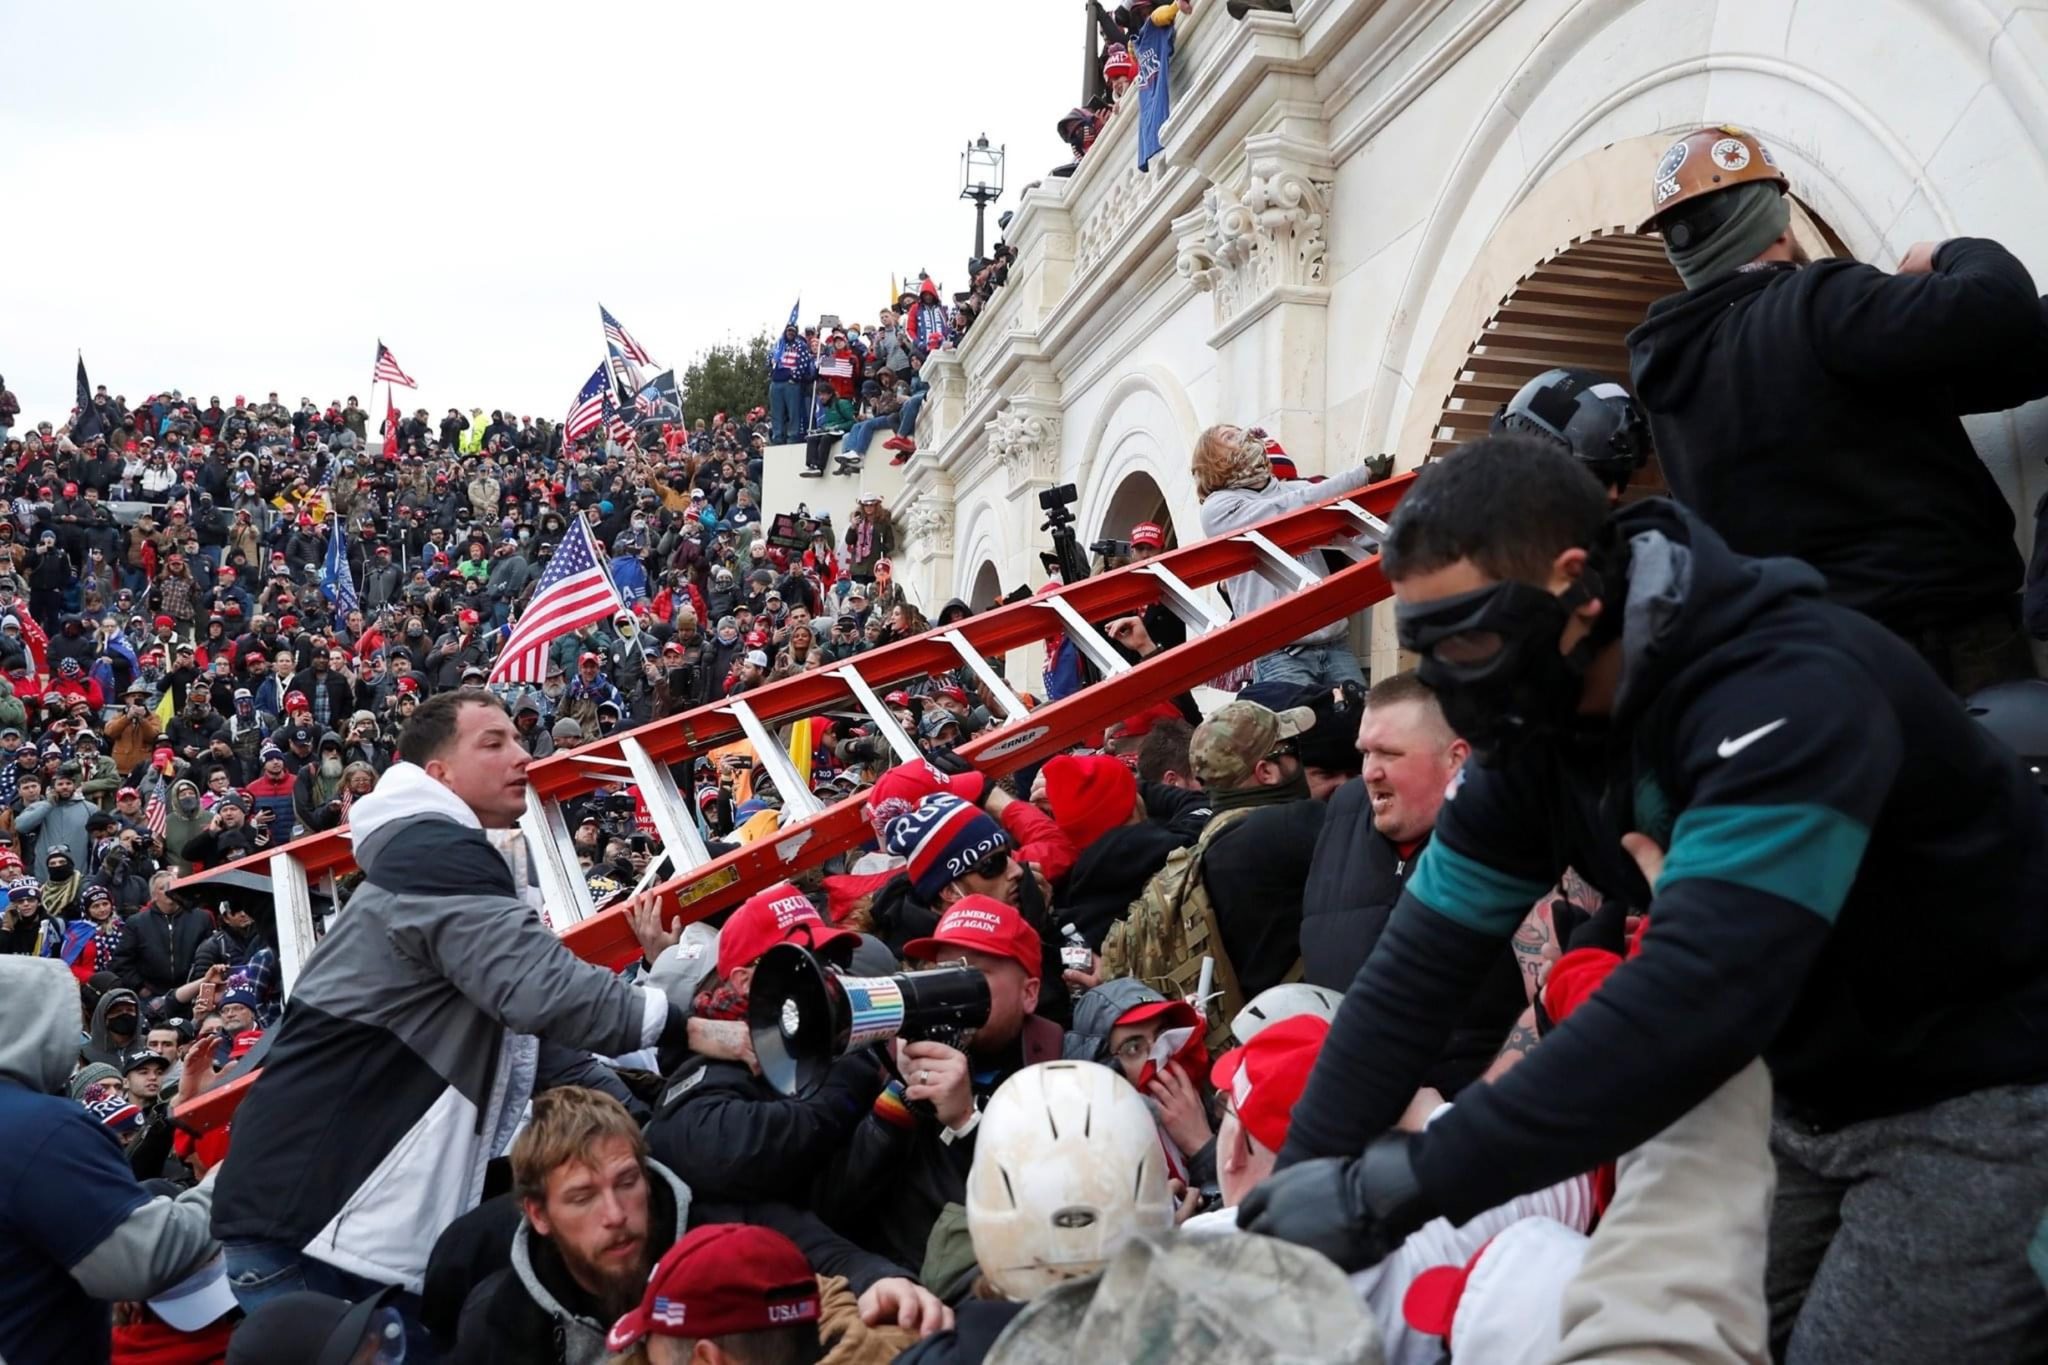 Insurrectionists swarm the Capitol steps in Washington D.C. on January 6. One is holding a ladder to breach the Capitol building.